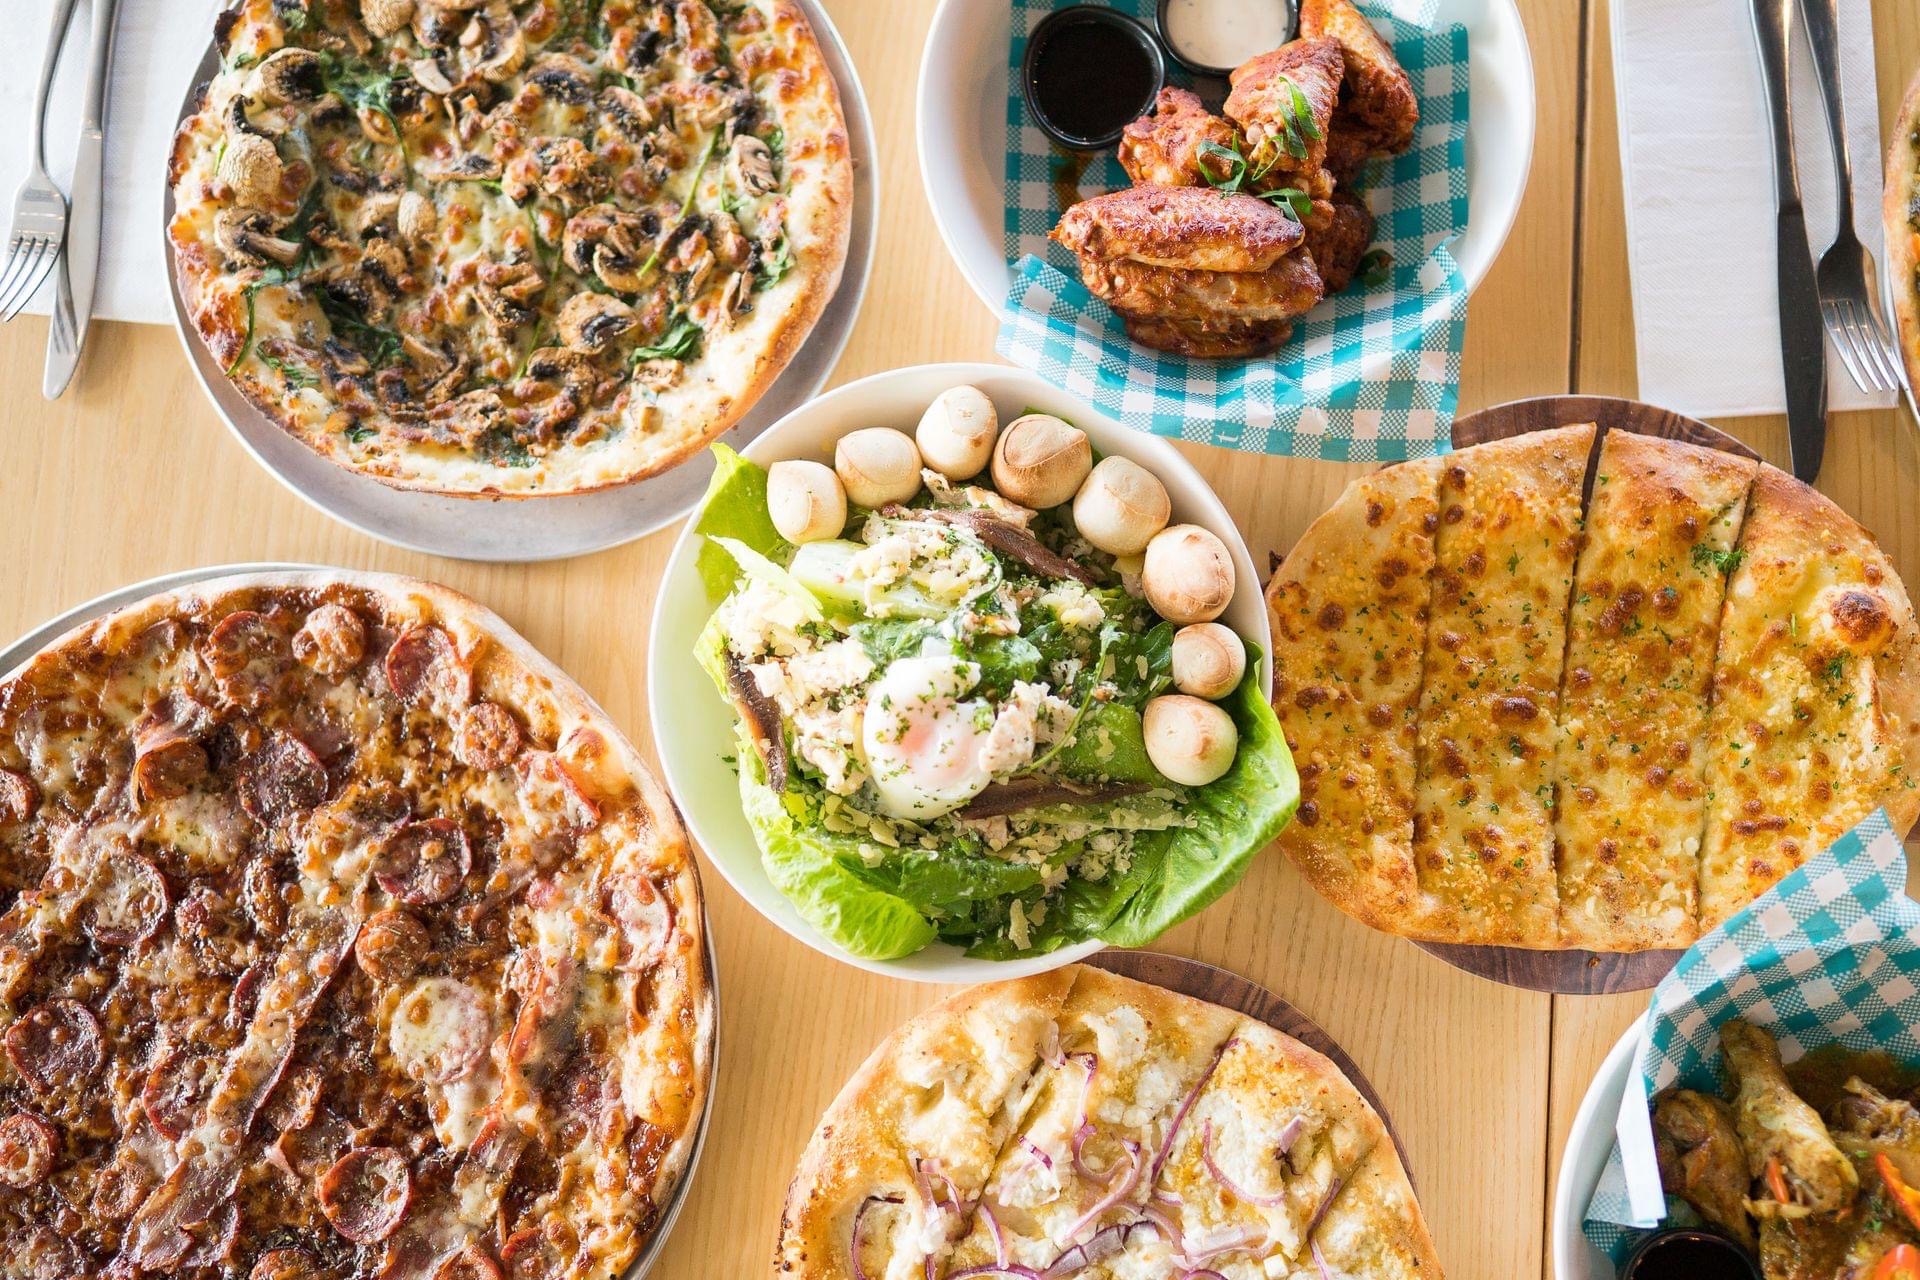 WIN One Of Five Double Passes To Join Us For A Feed-Me Dinner At DoughBalls Pizza!